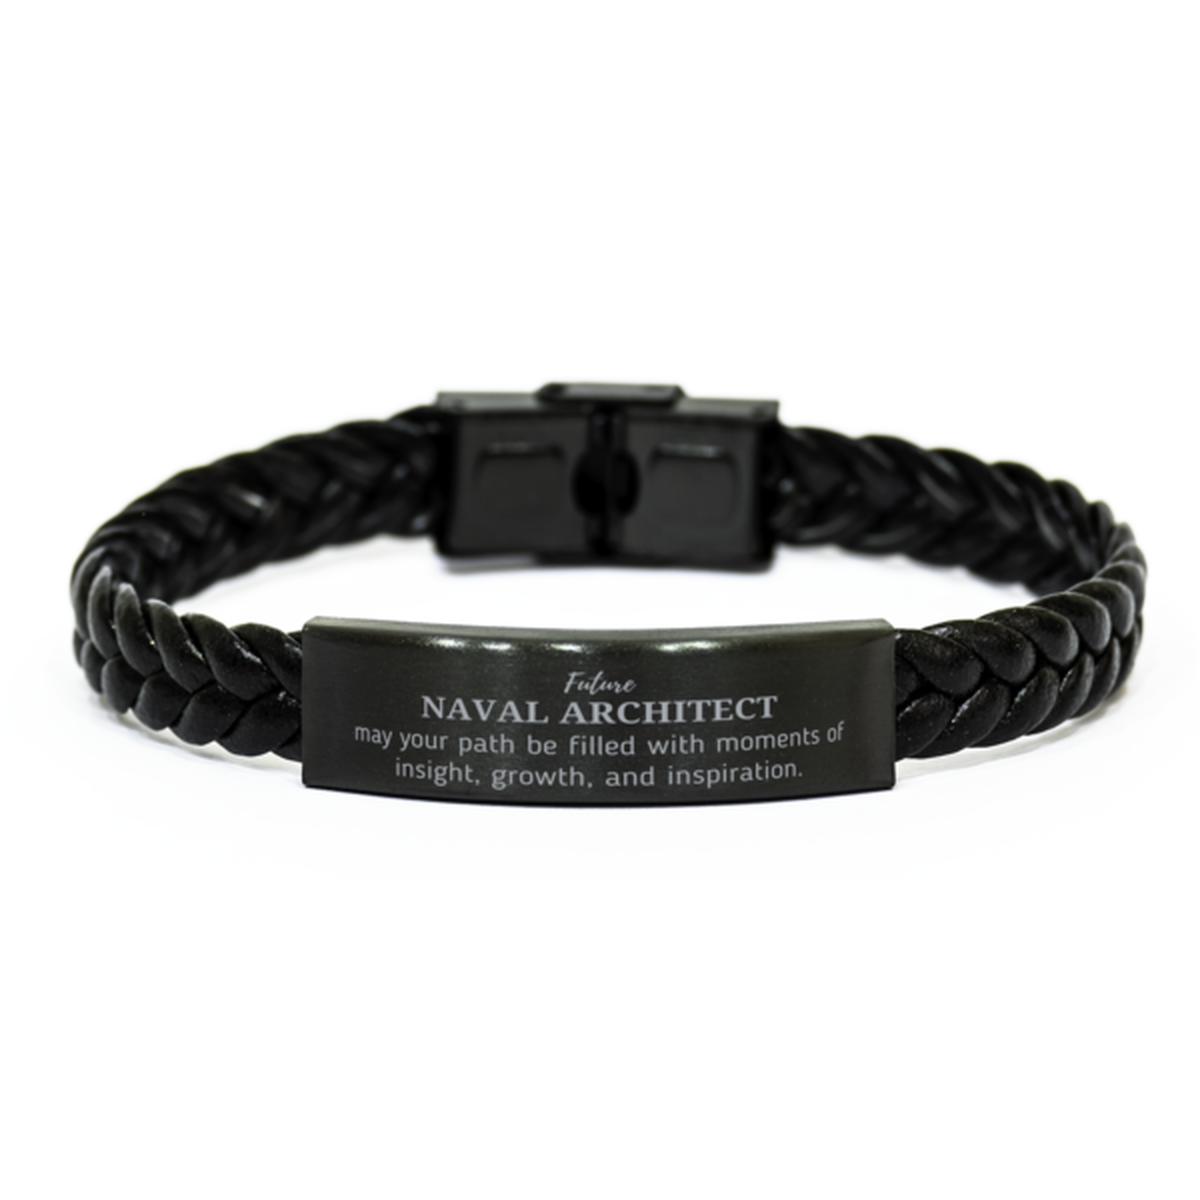 Future Naval Architect Gifts, May your path be filled with moments of insight, Graduation Gifts for New Naval Architect, Christmas Unique Braided Leather Bracelet For Men, Women, Friends